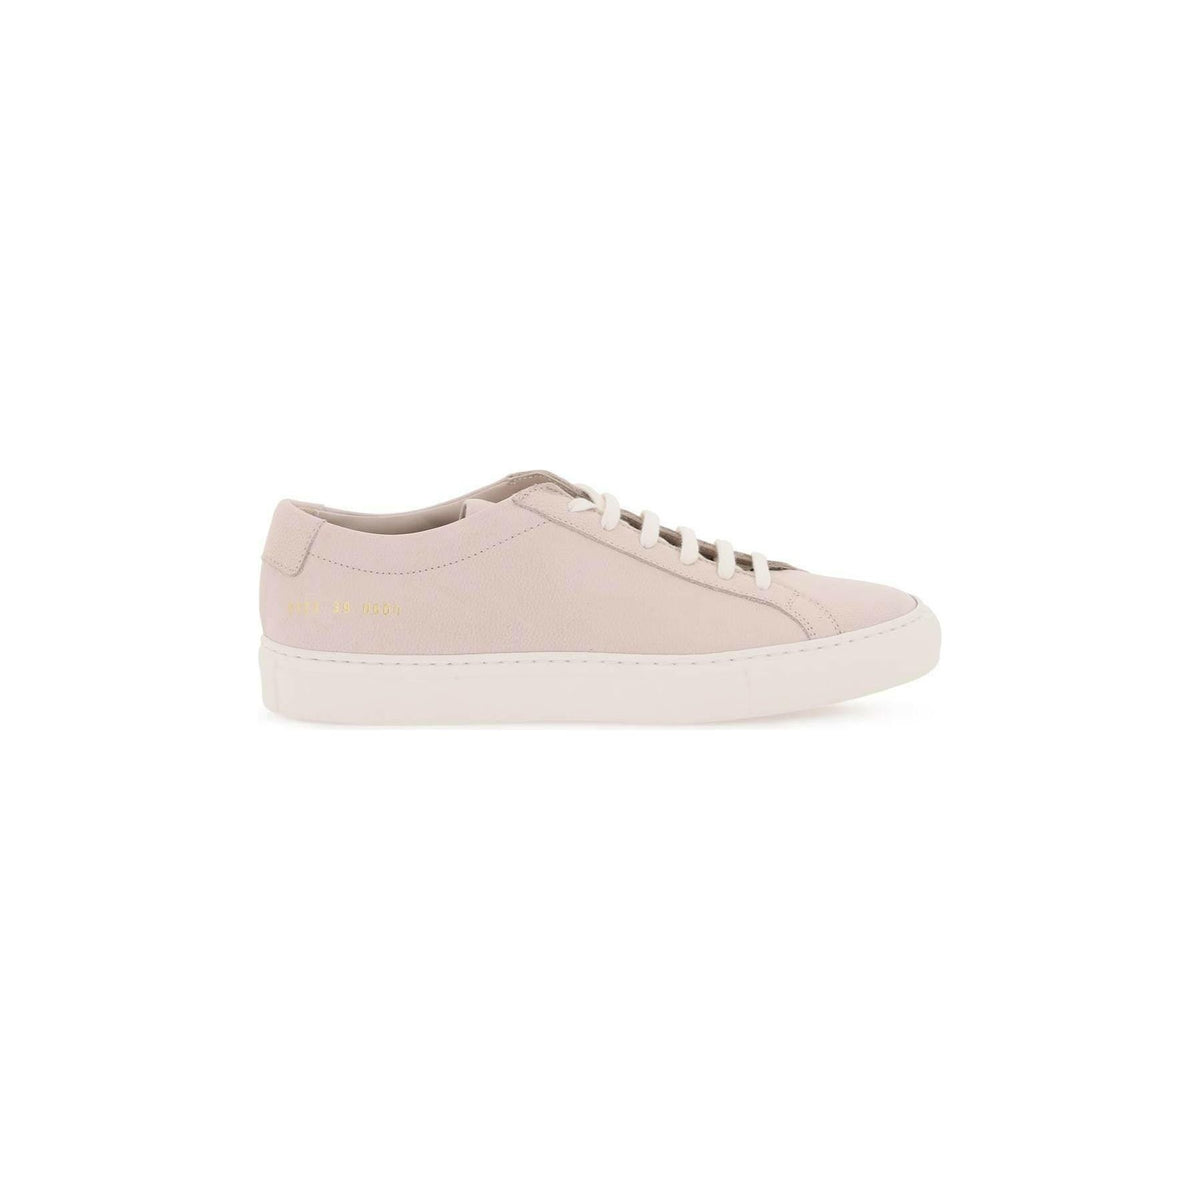 COMMON PROJECTS - Nude Original Achilles Low-Top Leather Sneakers - JOHN JULIA